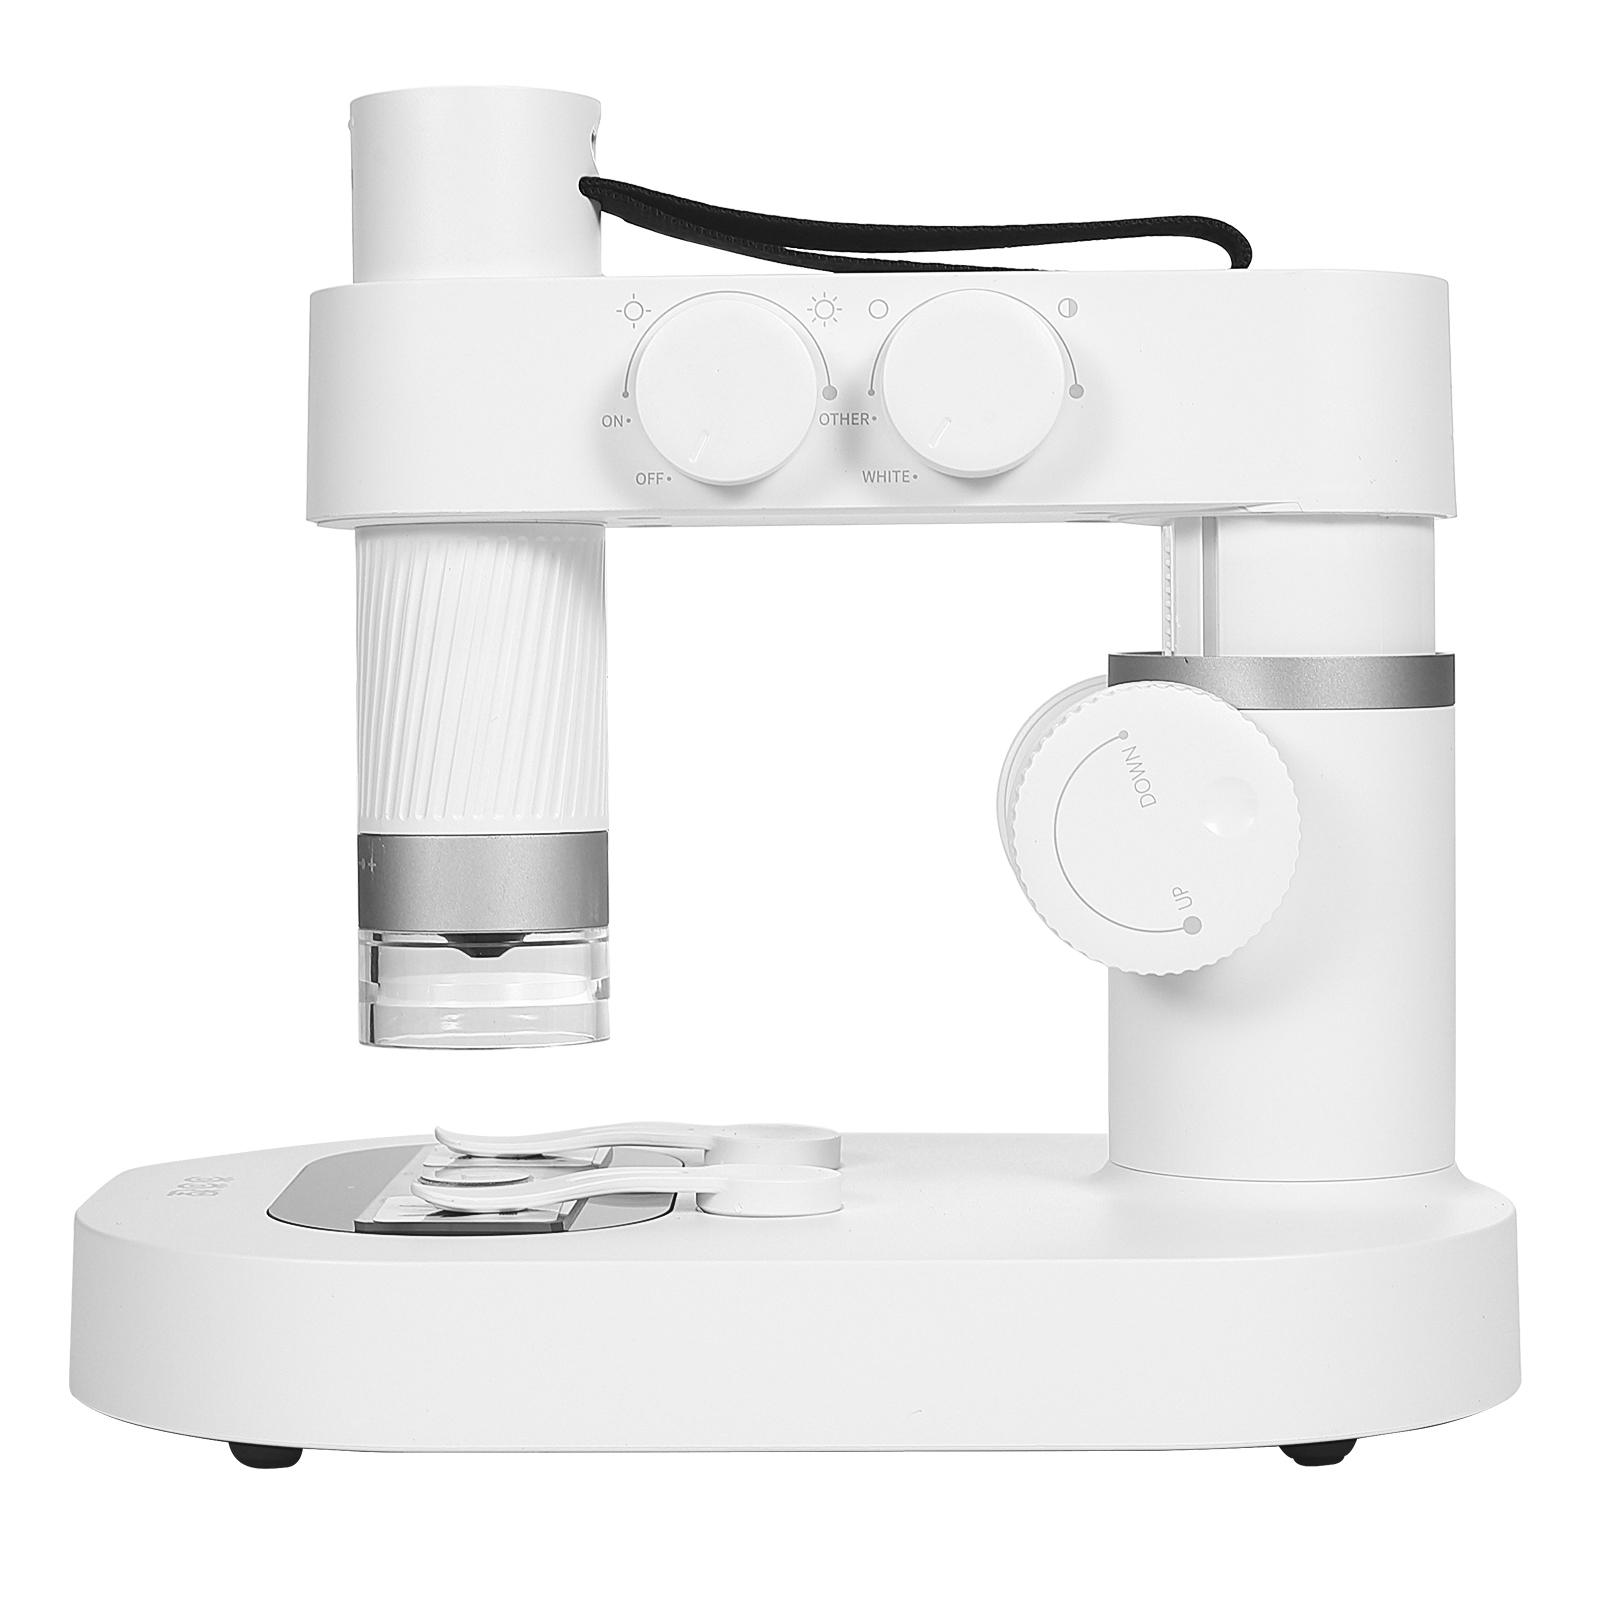 High Magnification Science Handheld Biological Microscope